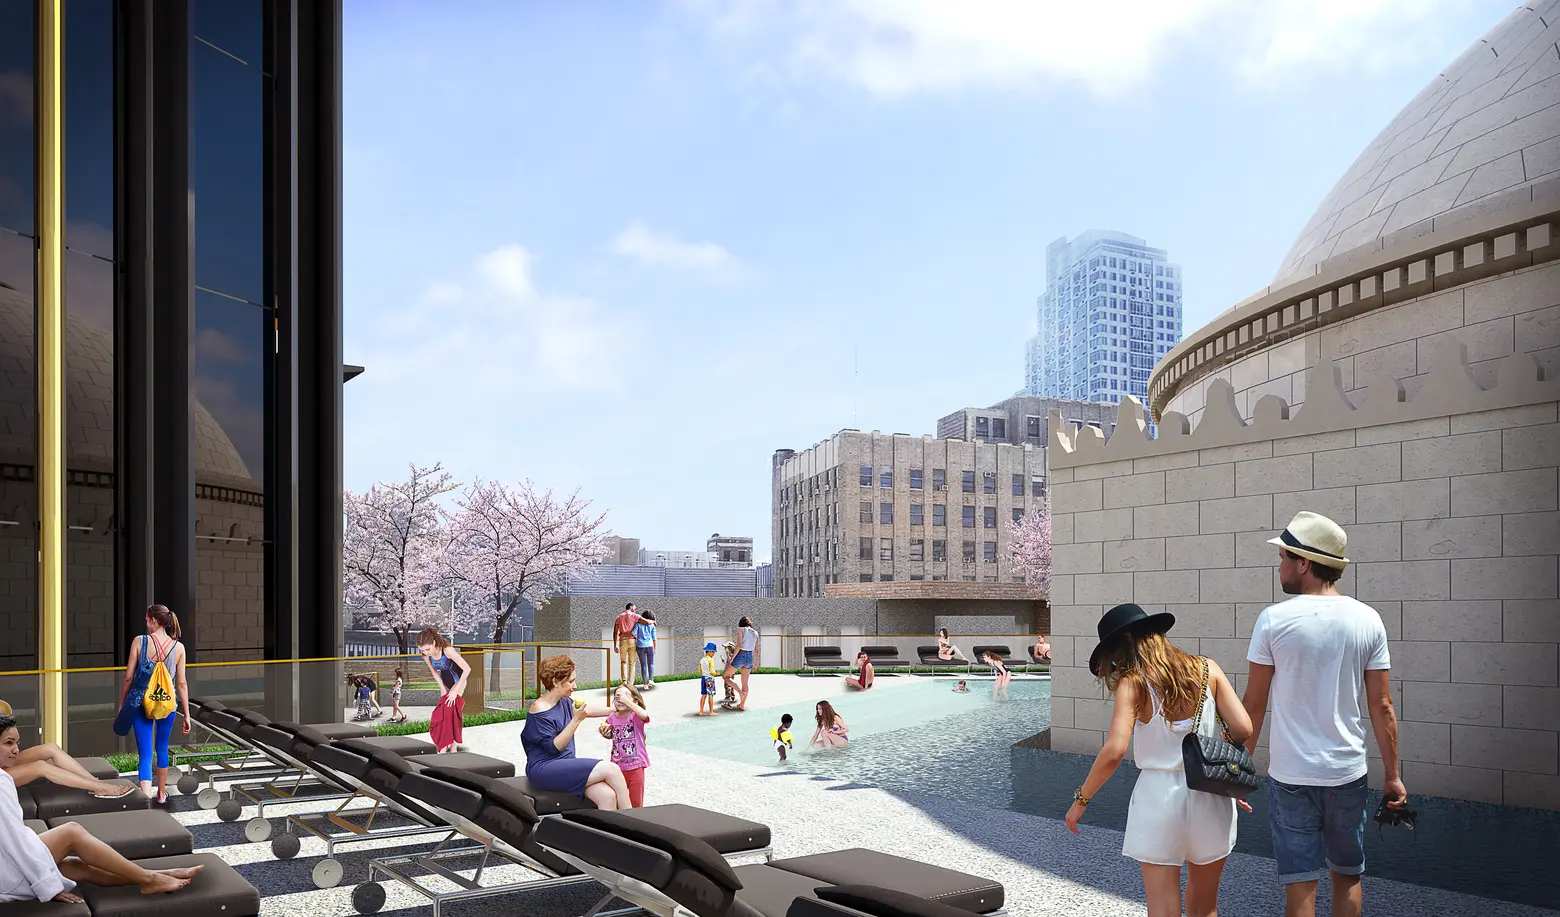 At 9 DeKalb, SHoP Architects reveal a rooftop pool wrapping around Dime Savings Bank’s dome